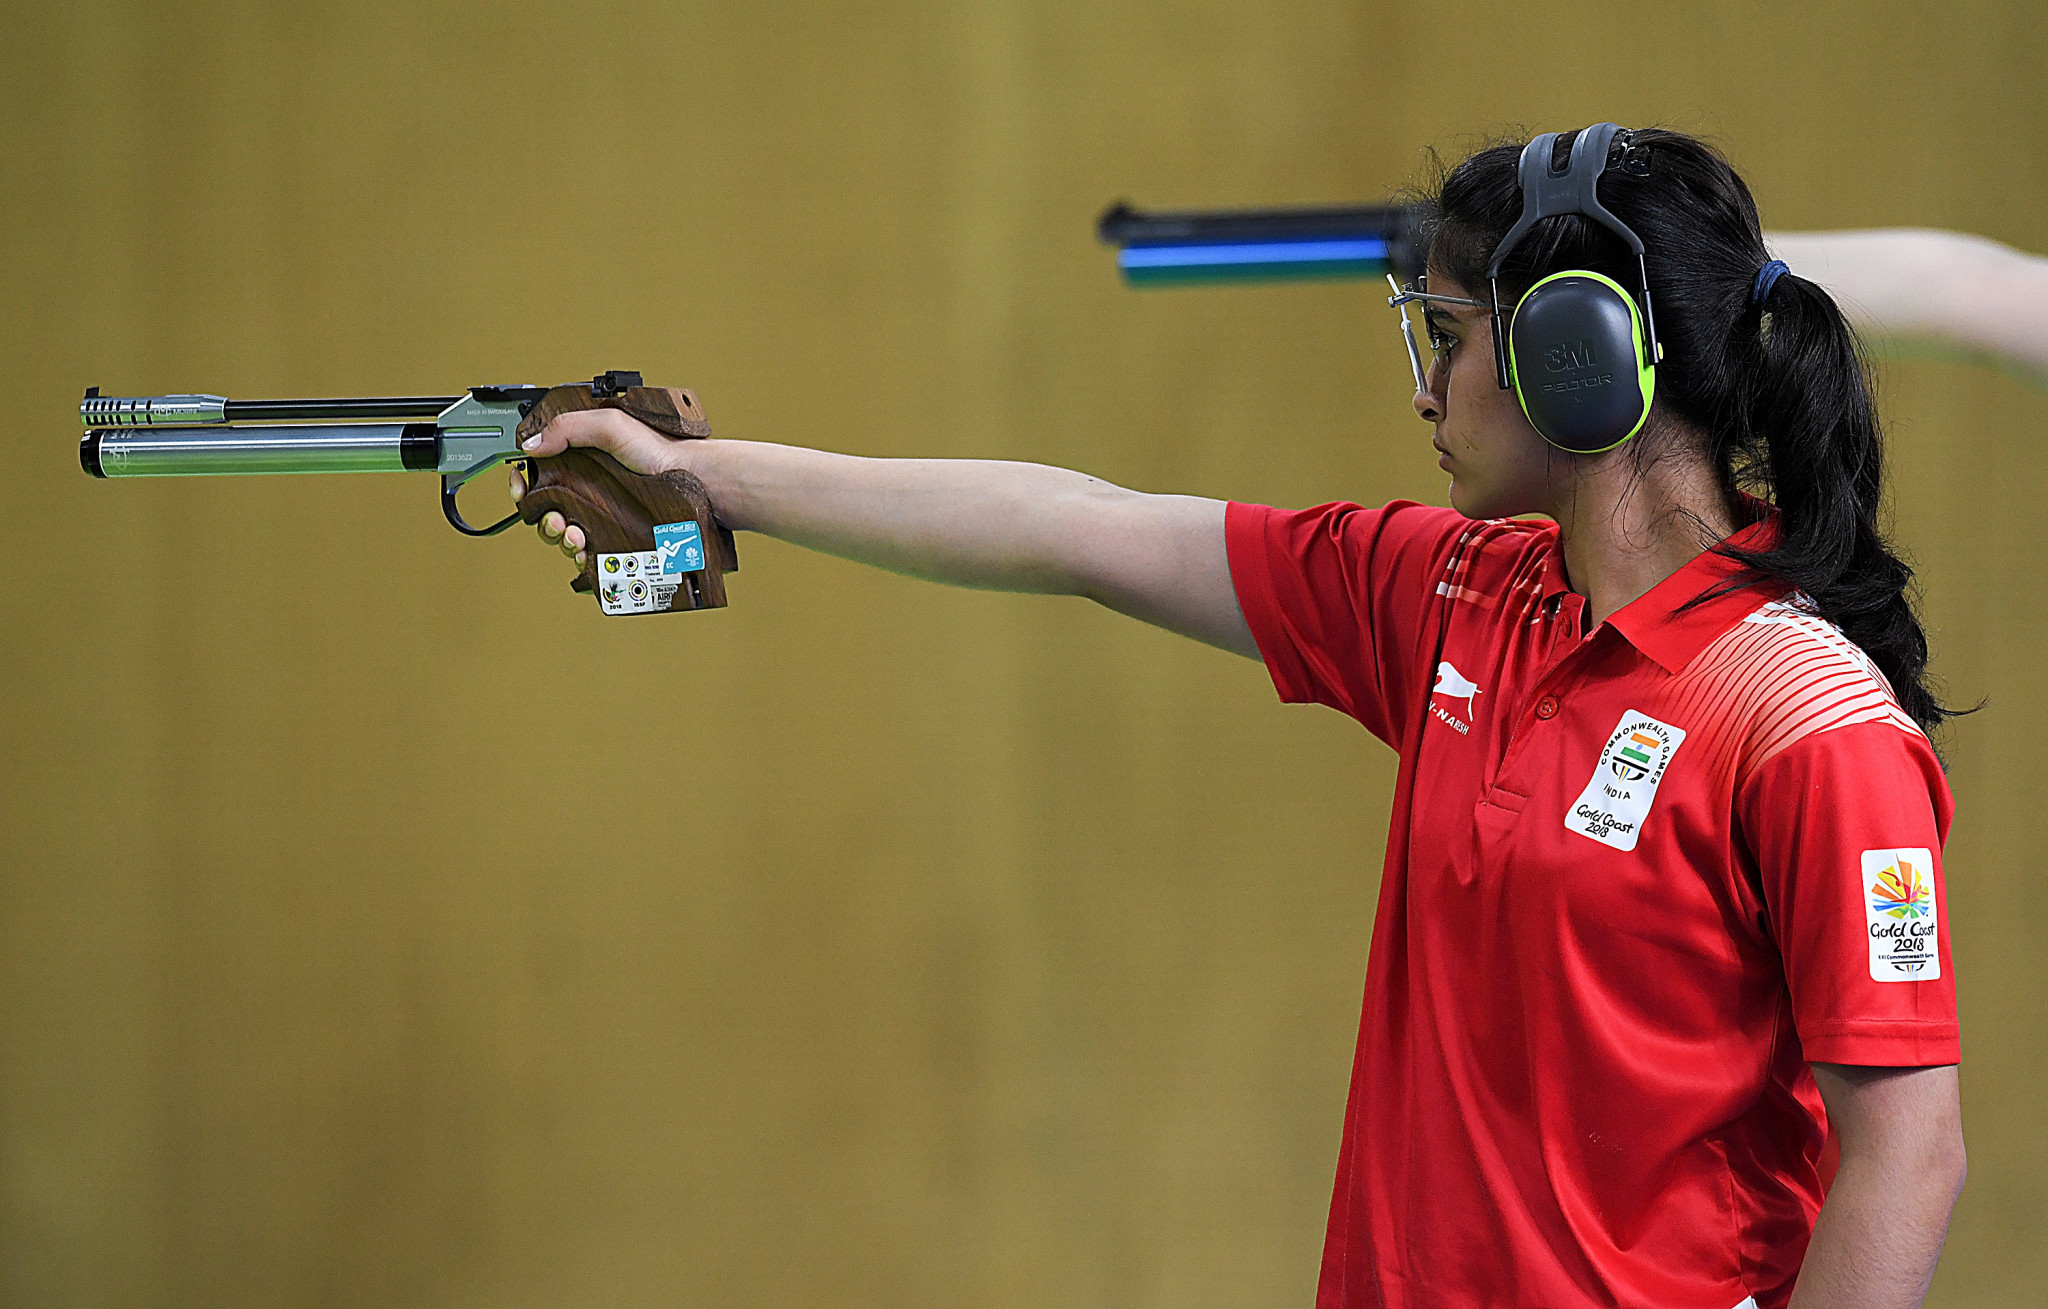 Indian teenager clinches women's air pistol gold at Gold Coast 2018